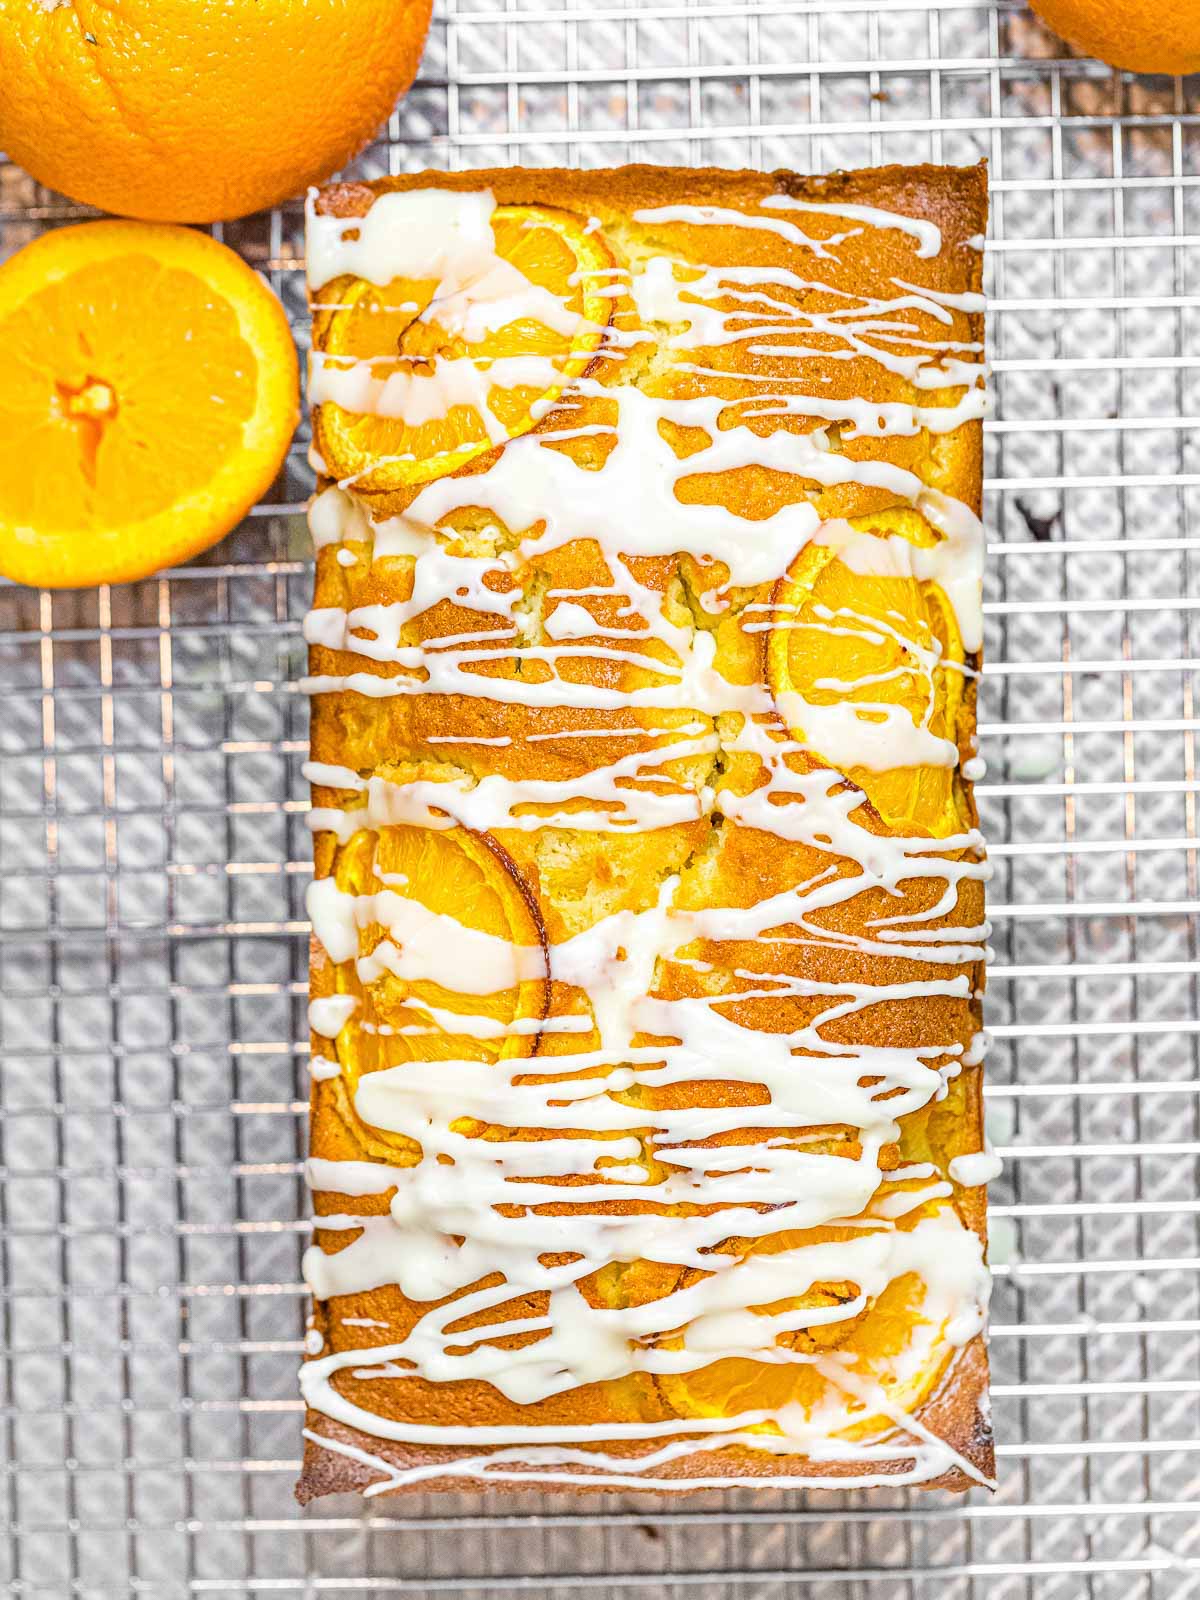 orange pound cake with glaze drizzled on top and decorated with oranges on top of a metal wire rack